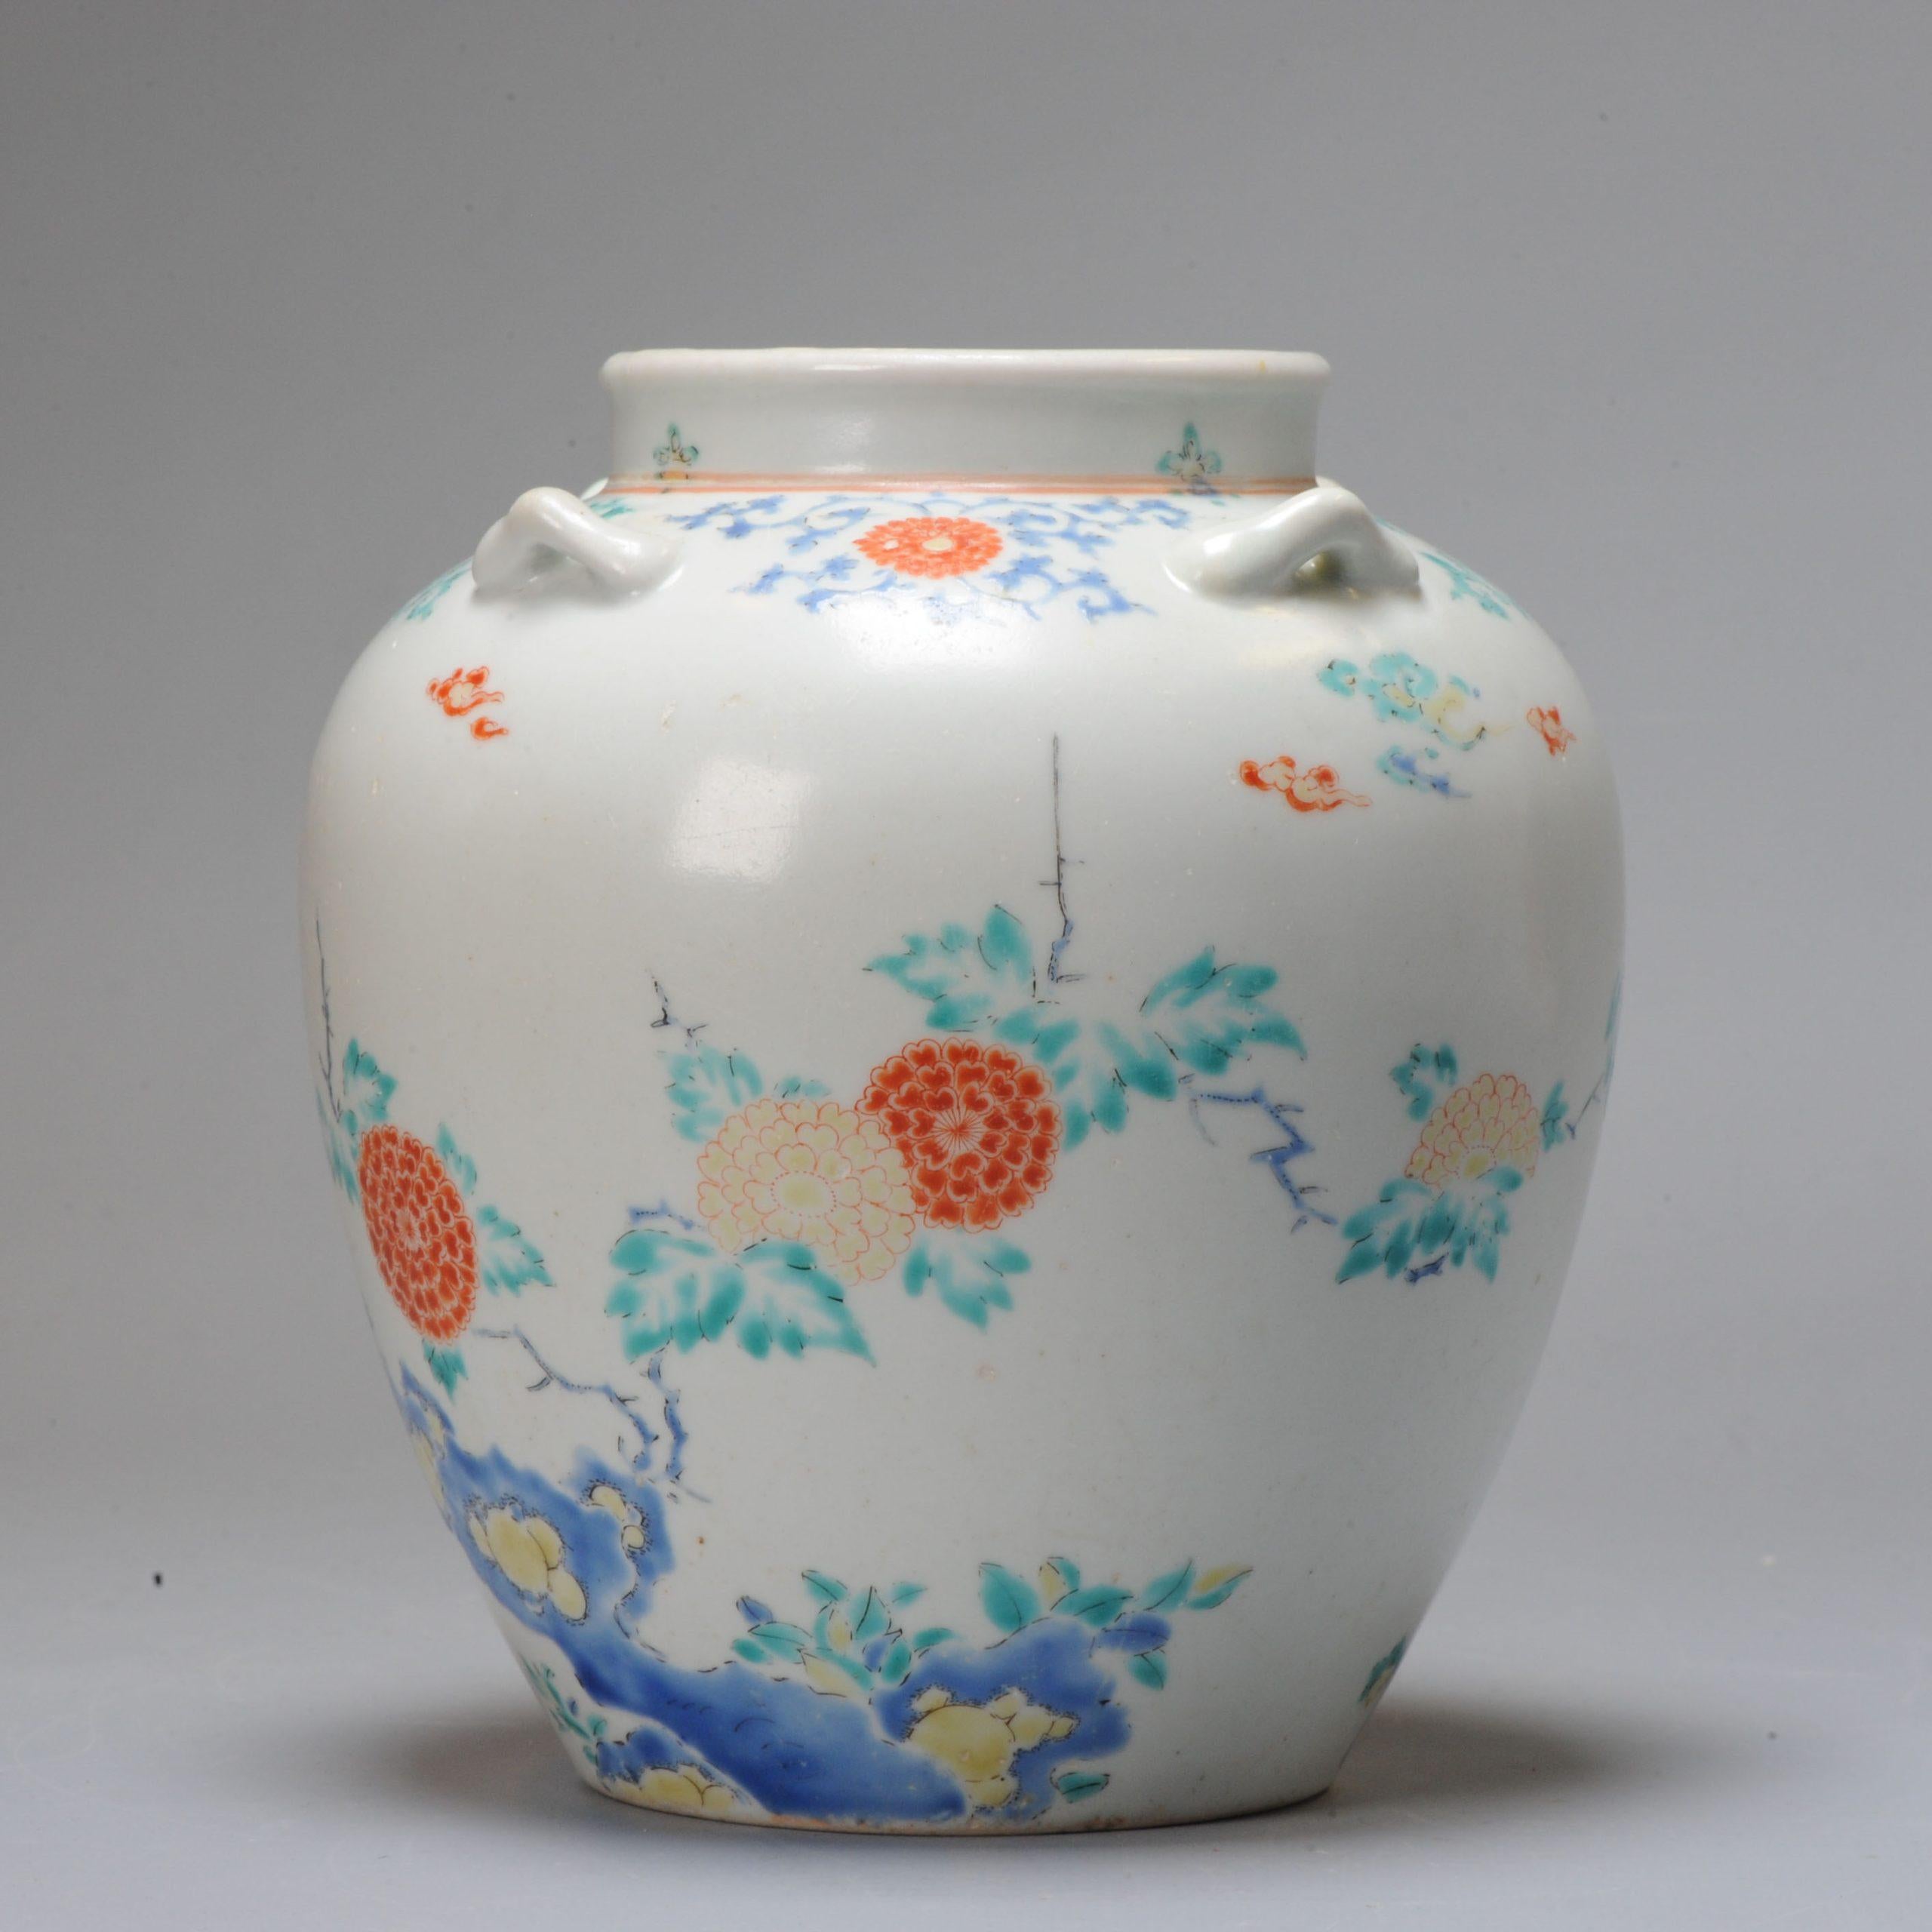 A Kakiemon jar with handles
Edo period (late 17th century)
The Jar or pot is of great and delicate shape and decorated in iron-red, blue, green and yellow enamels with different kind of flowers, rocks, clouds and karakusa.
With matching